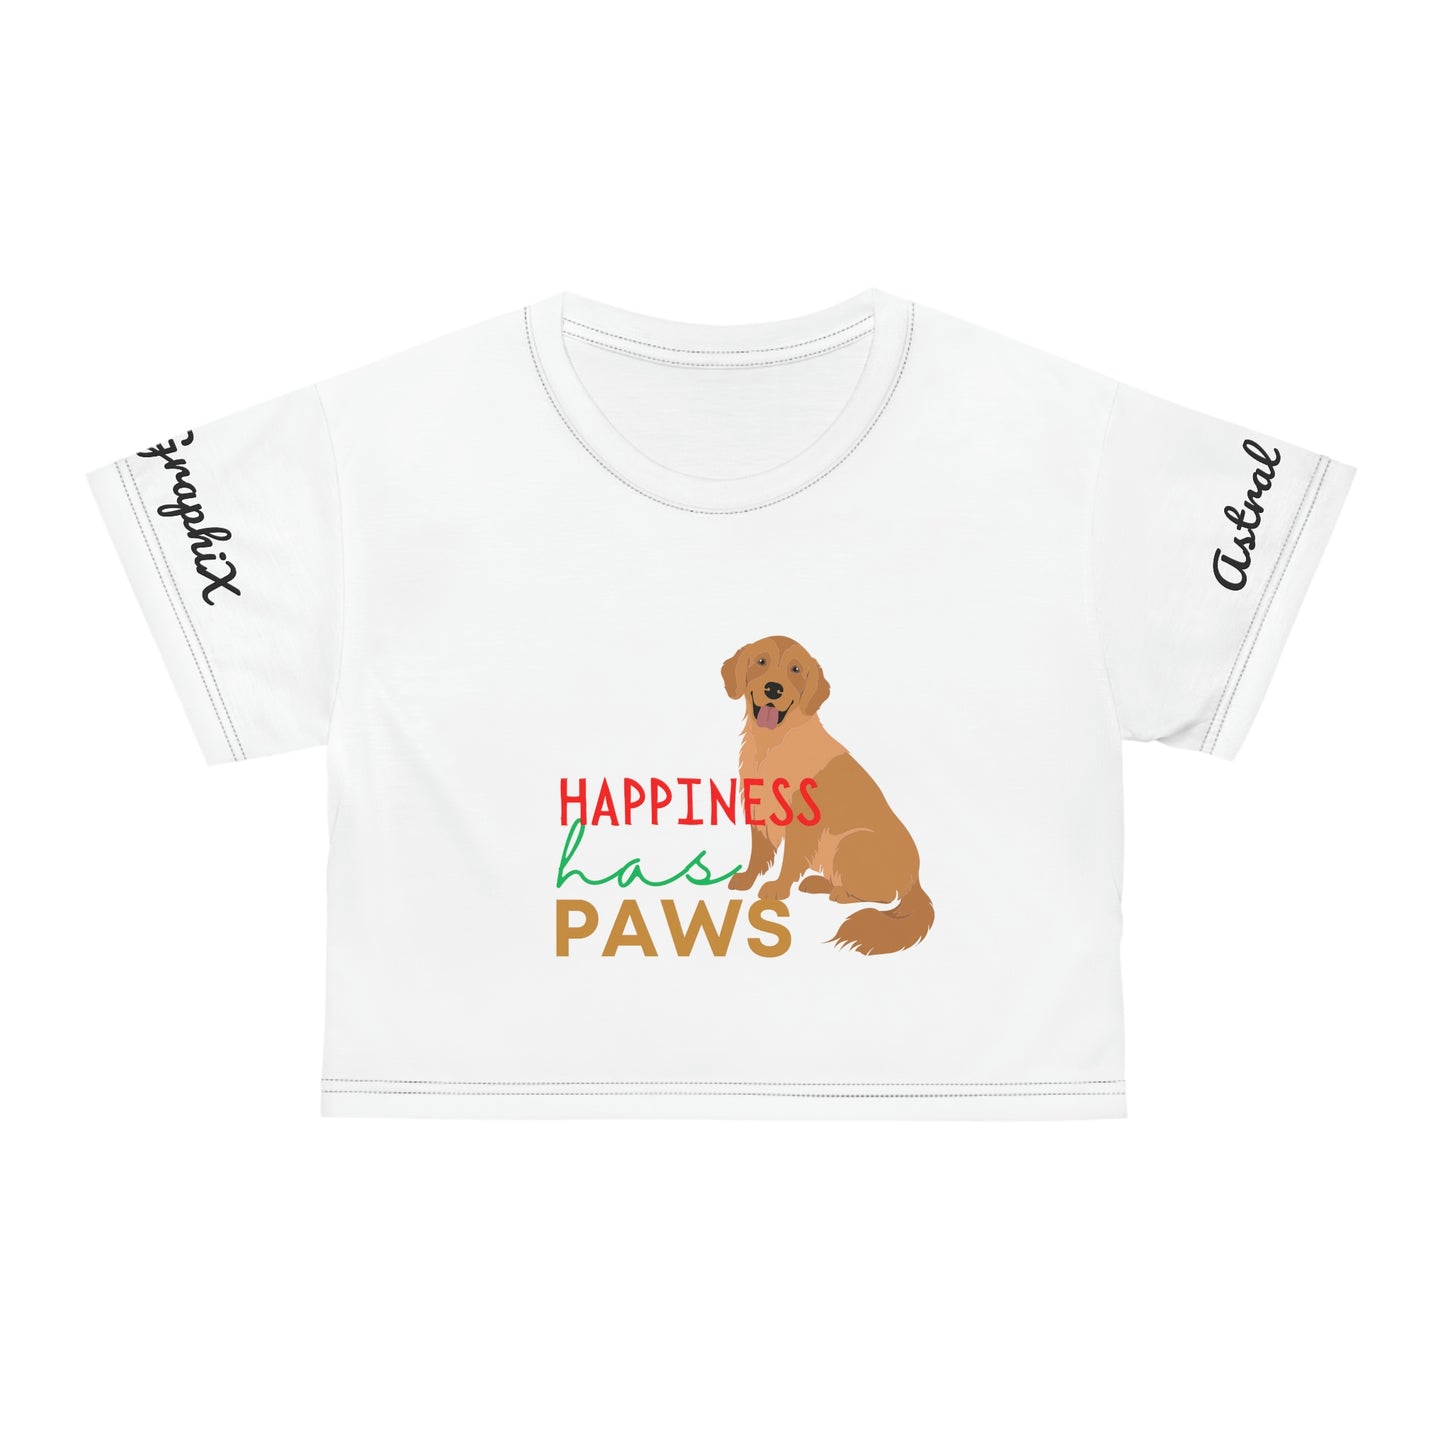 Animal Collection - AOP Crop Tee - Has Paws v2 in White